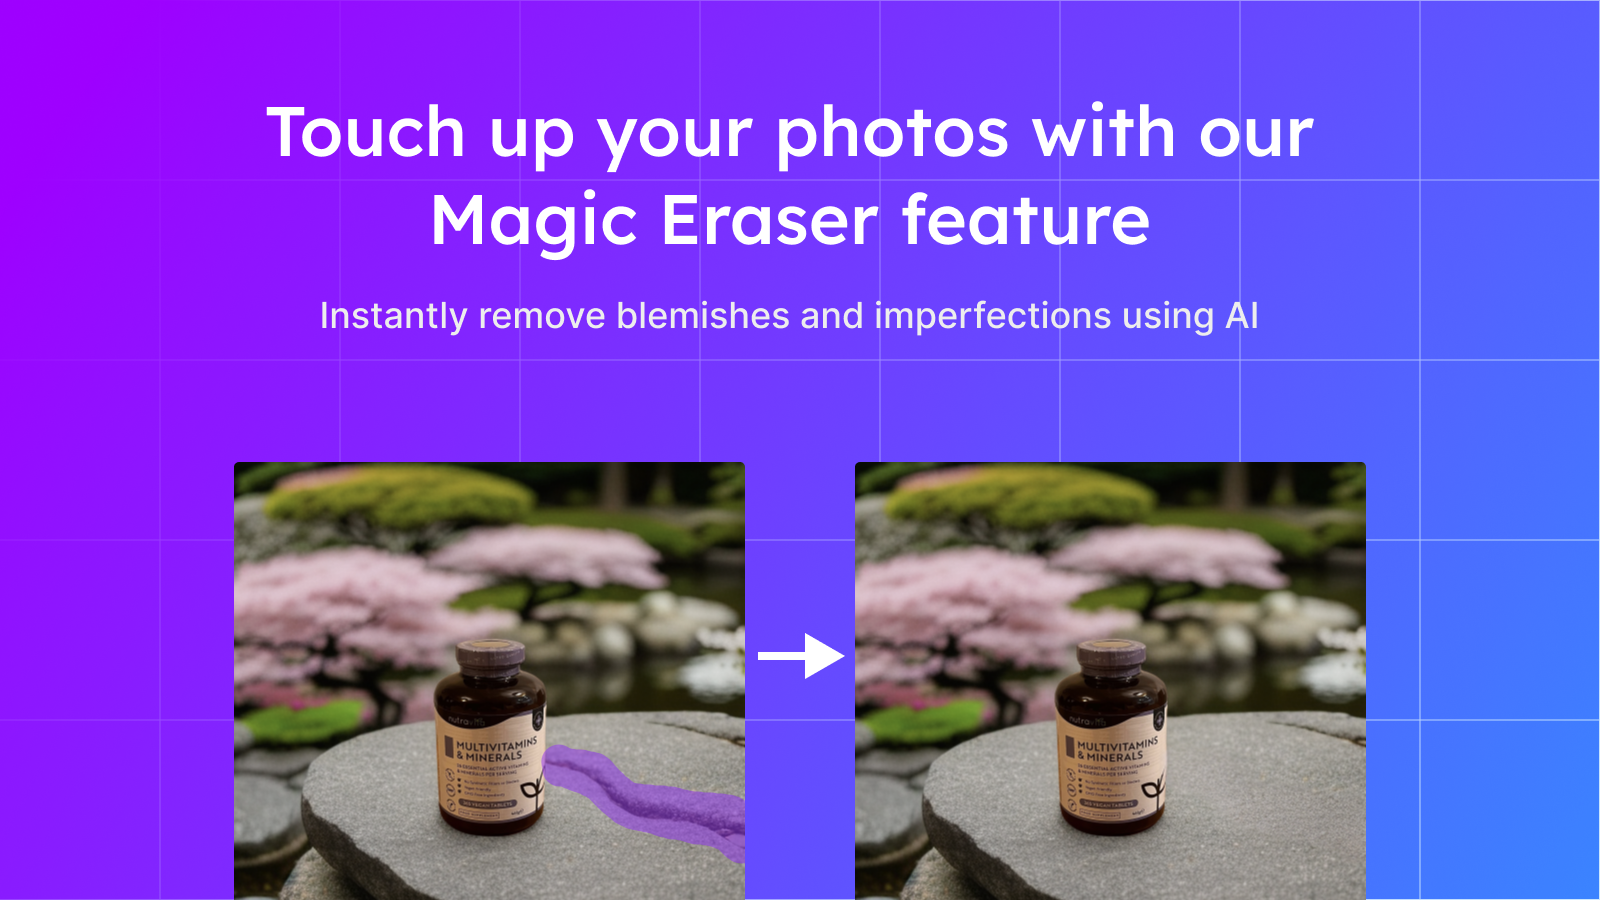 Touch up your photos with our Magic Eraser feature